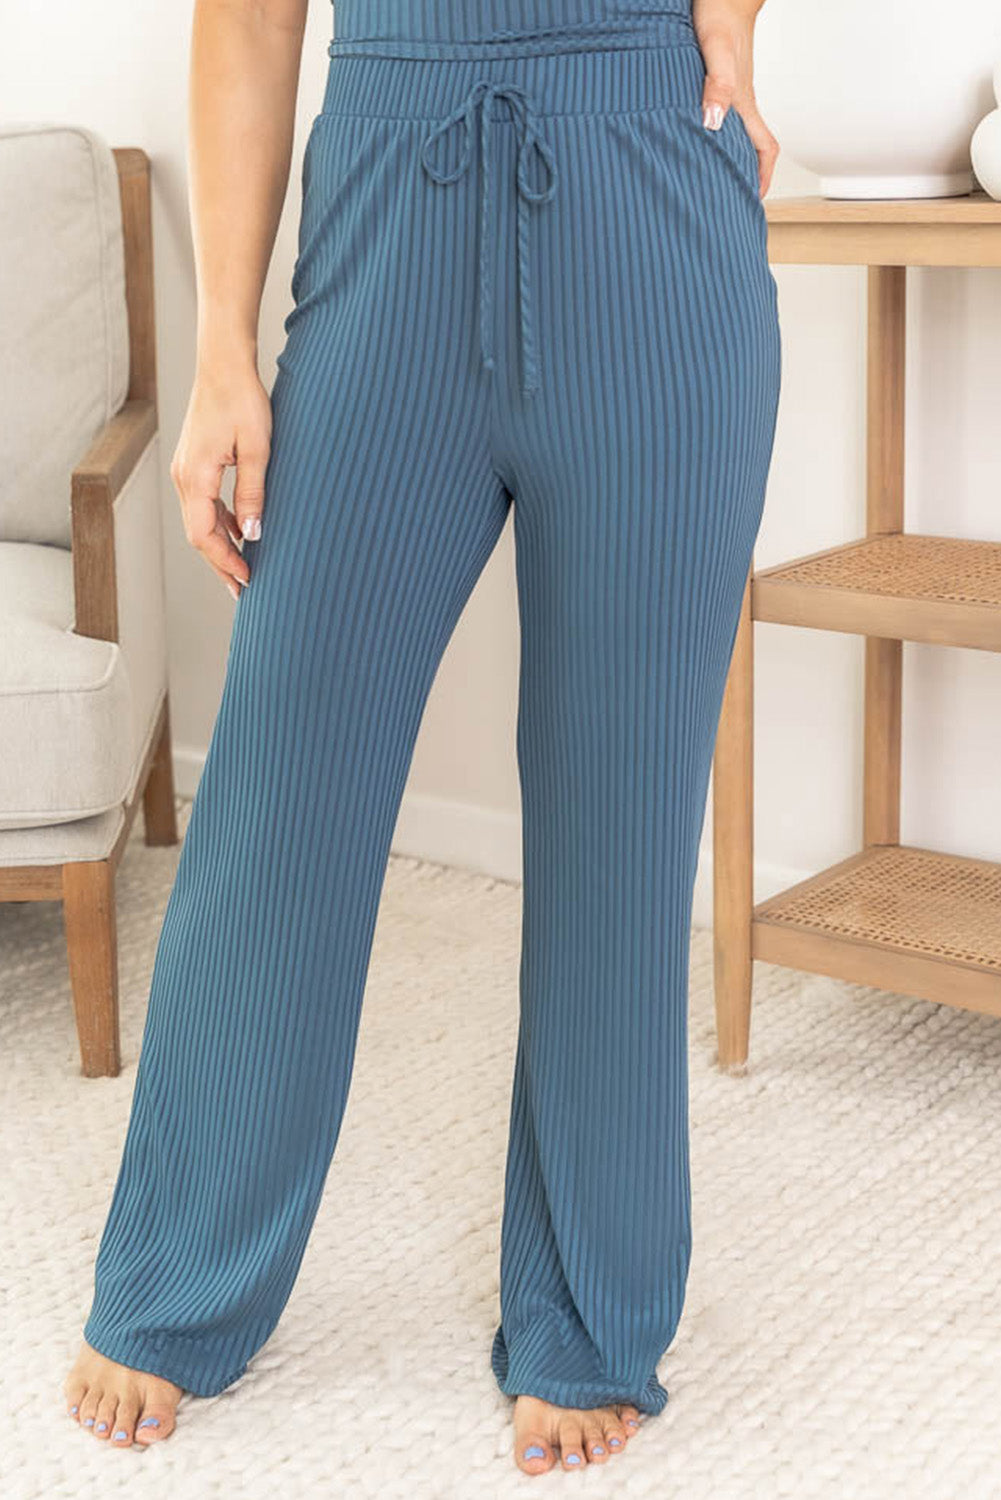 Women Clothing Summer Pajamas Women Solid Color Suspender Trousers Casual Ladies Home Casual Suit